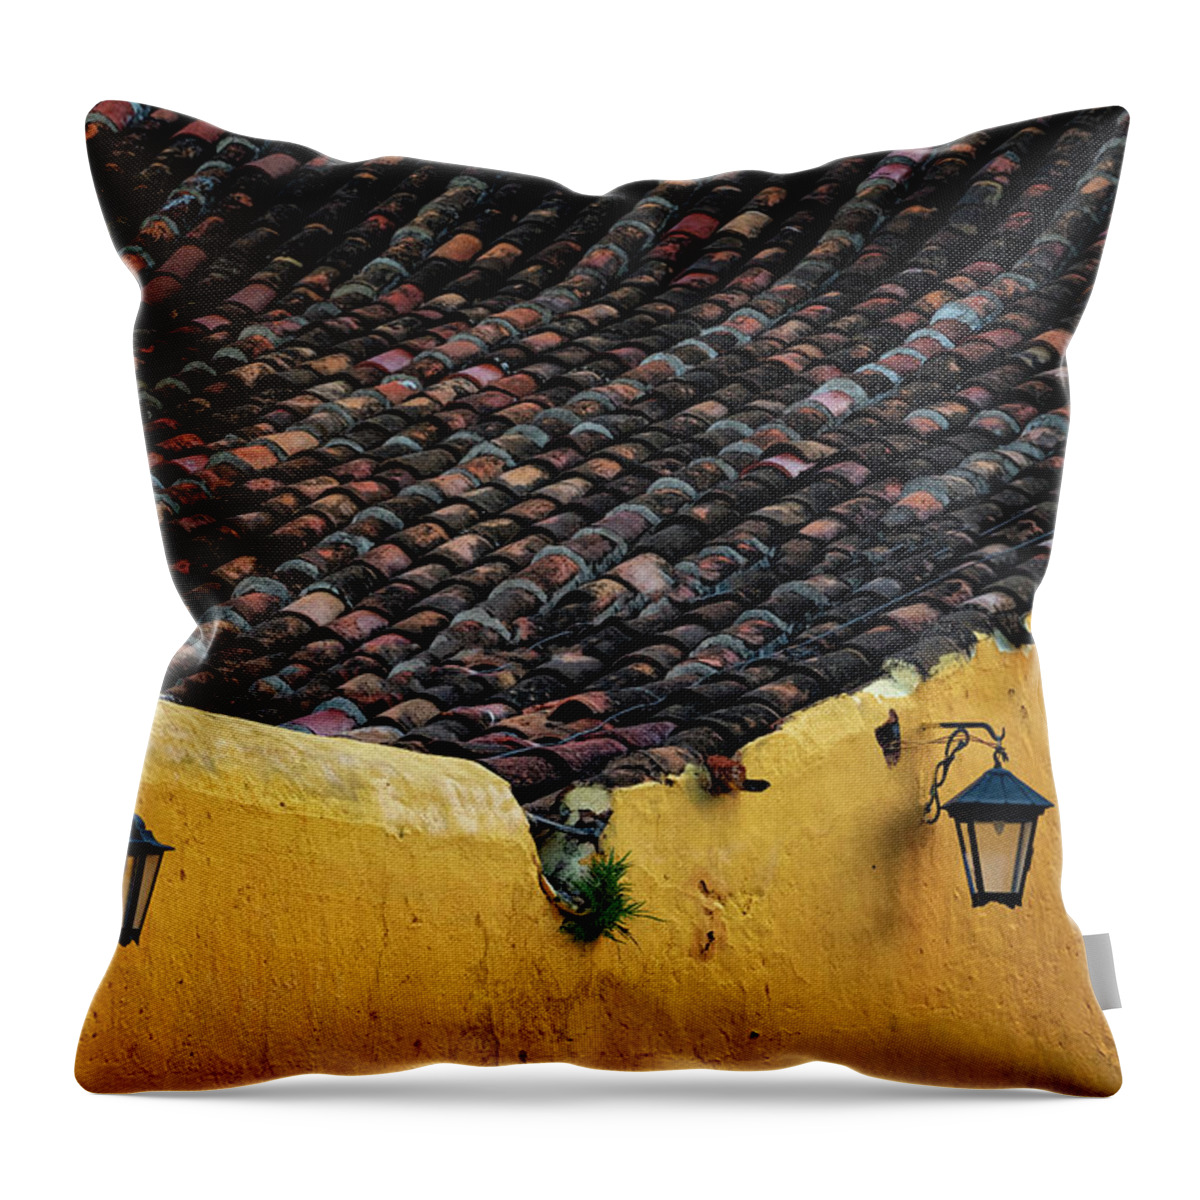 Havana Cuba Throw Pillow featuring the photograph Roof And Wall by Tom Singleton